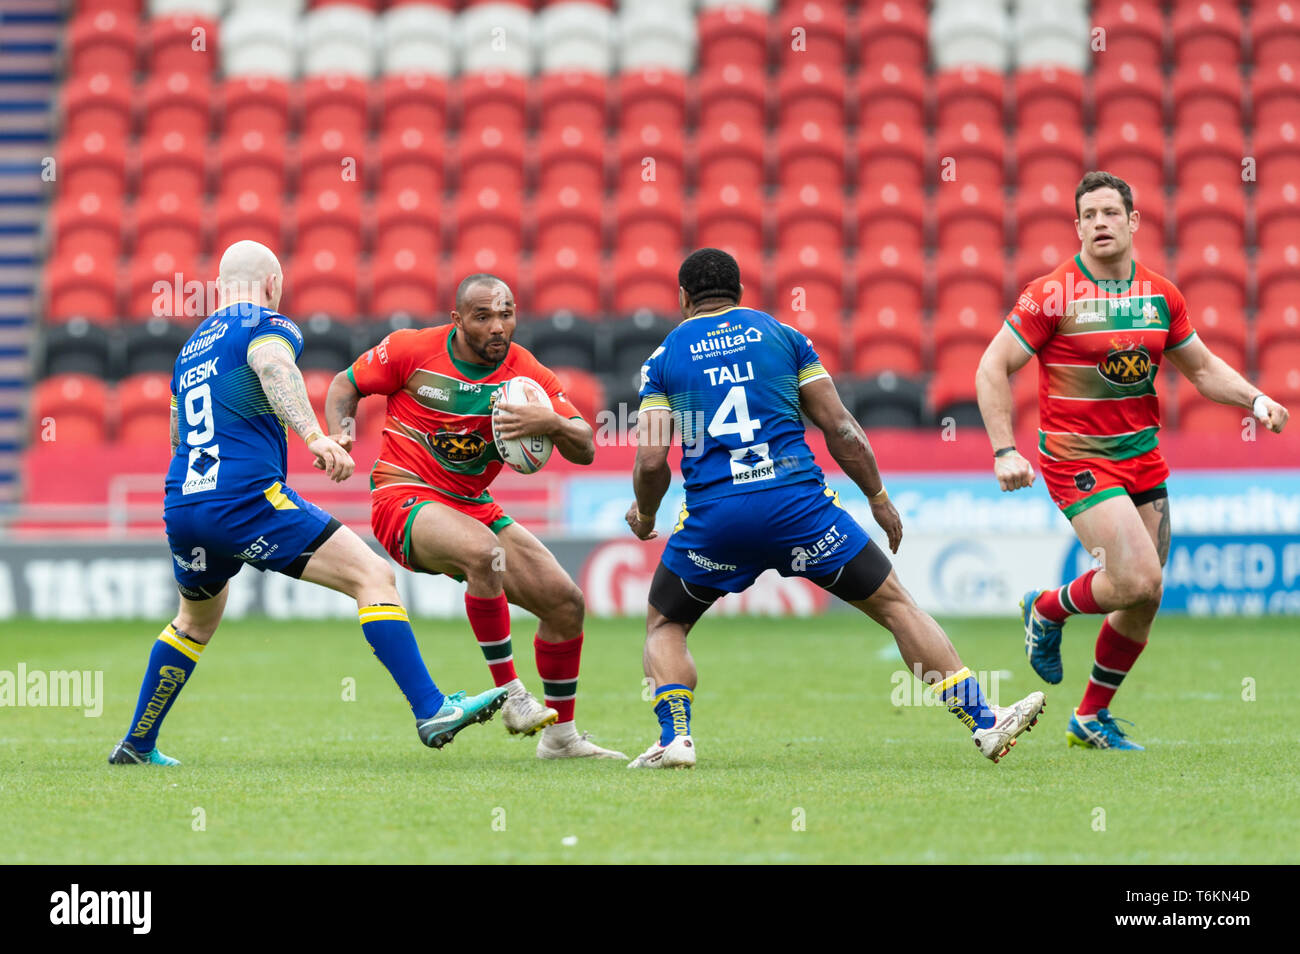 Doncaster 10-12 North Wales Crusaders - 28-04-2019 Banque D'Images